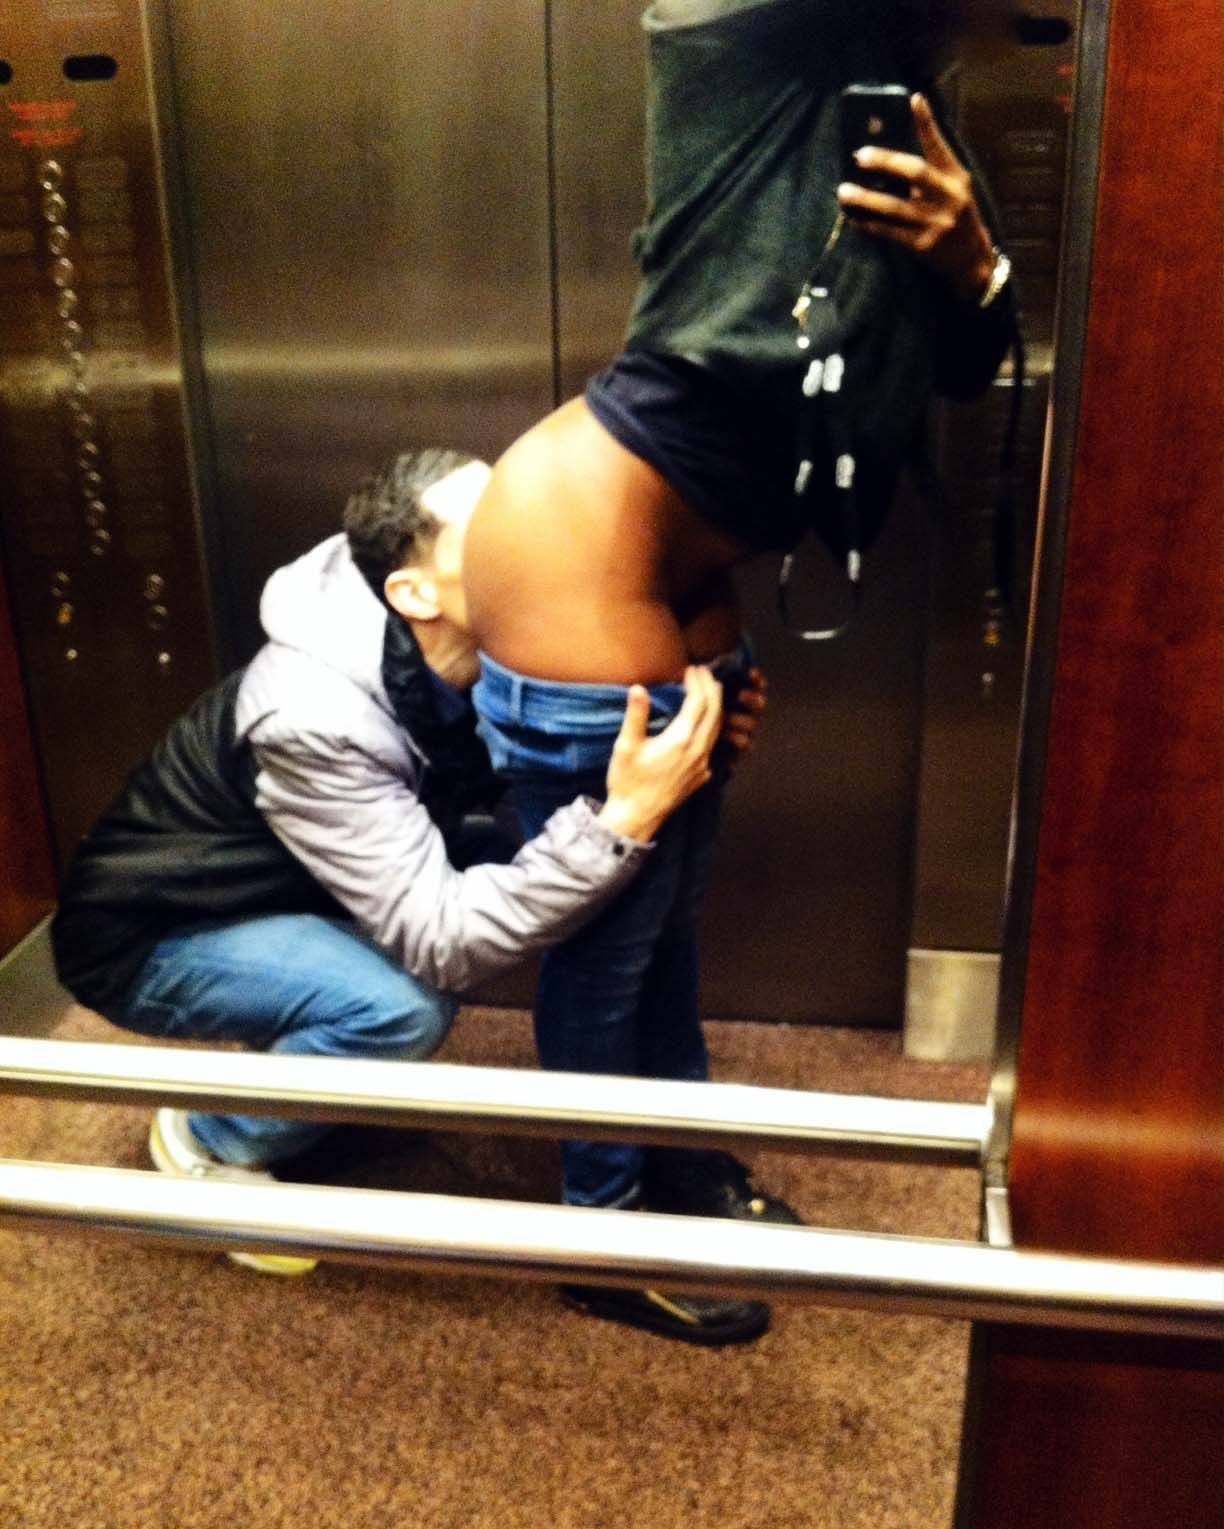 Amateur porn: Amateur pussy licking in the elevator.